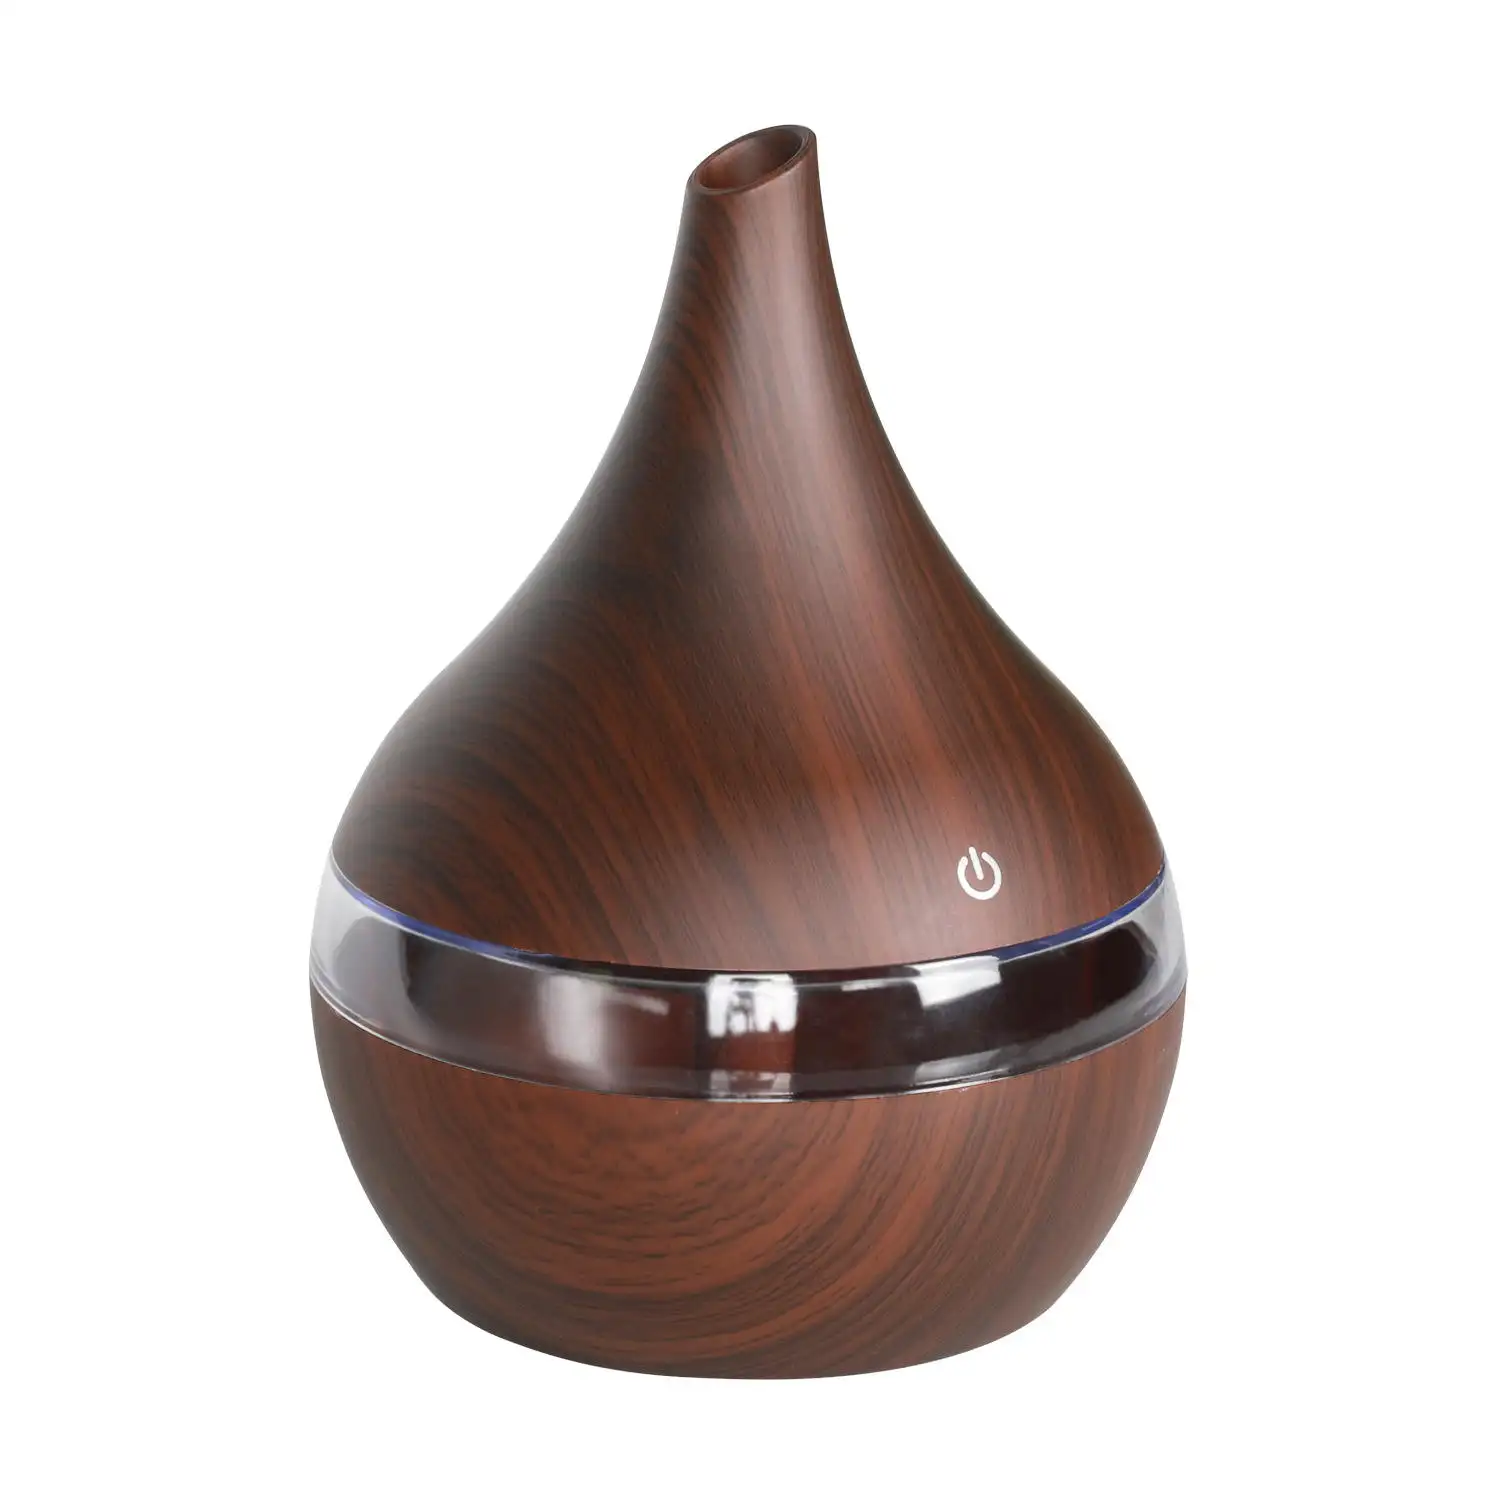 2020 Xiaomi Mijia Humidifier 4L Air Purifier Aromatherapy Humificador Diffuser Essential Oil Mist Maker for Office Home